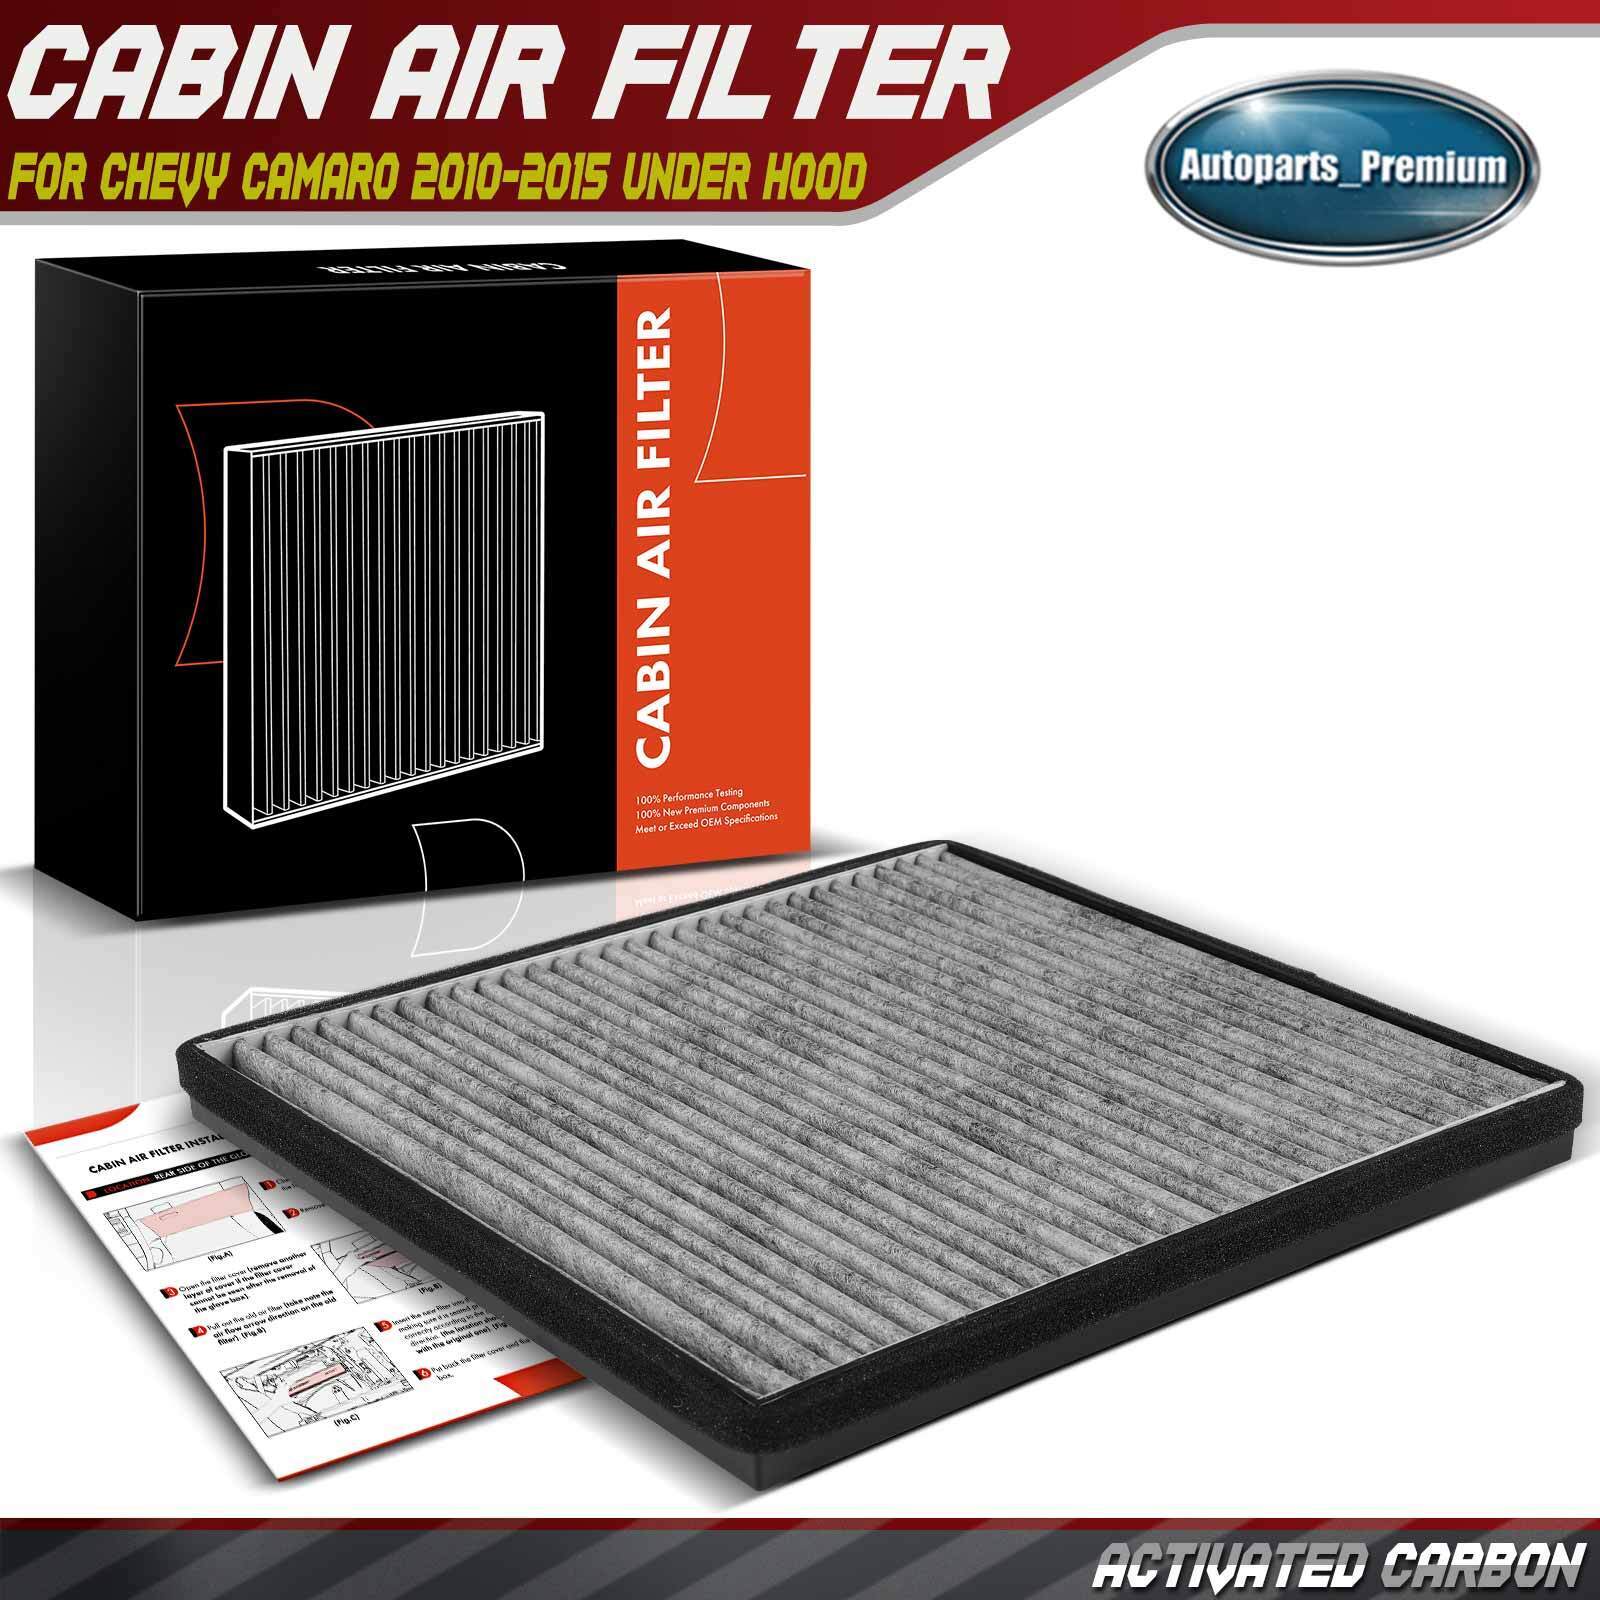 New Activated Carbon Cabin Air Filter for Chevrolet Camaro 2010-2015 Under Hood